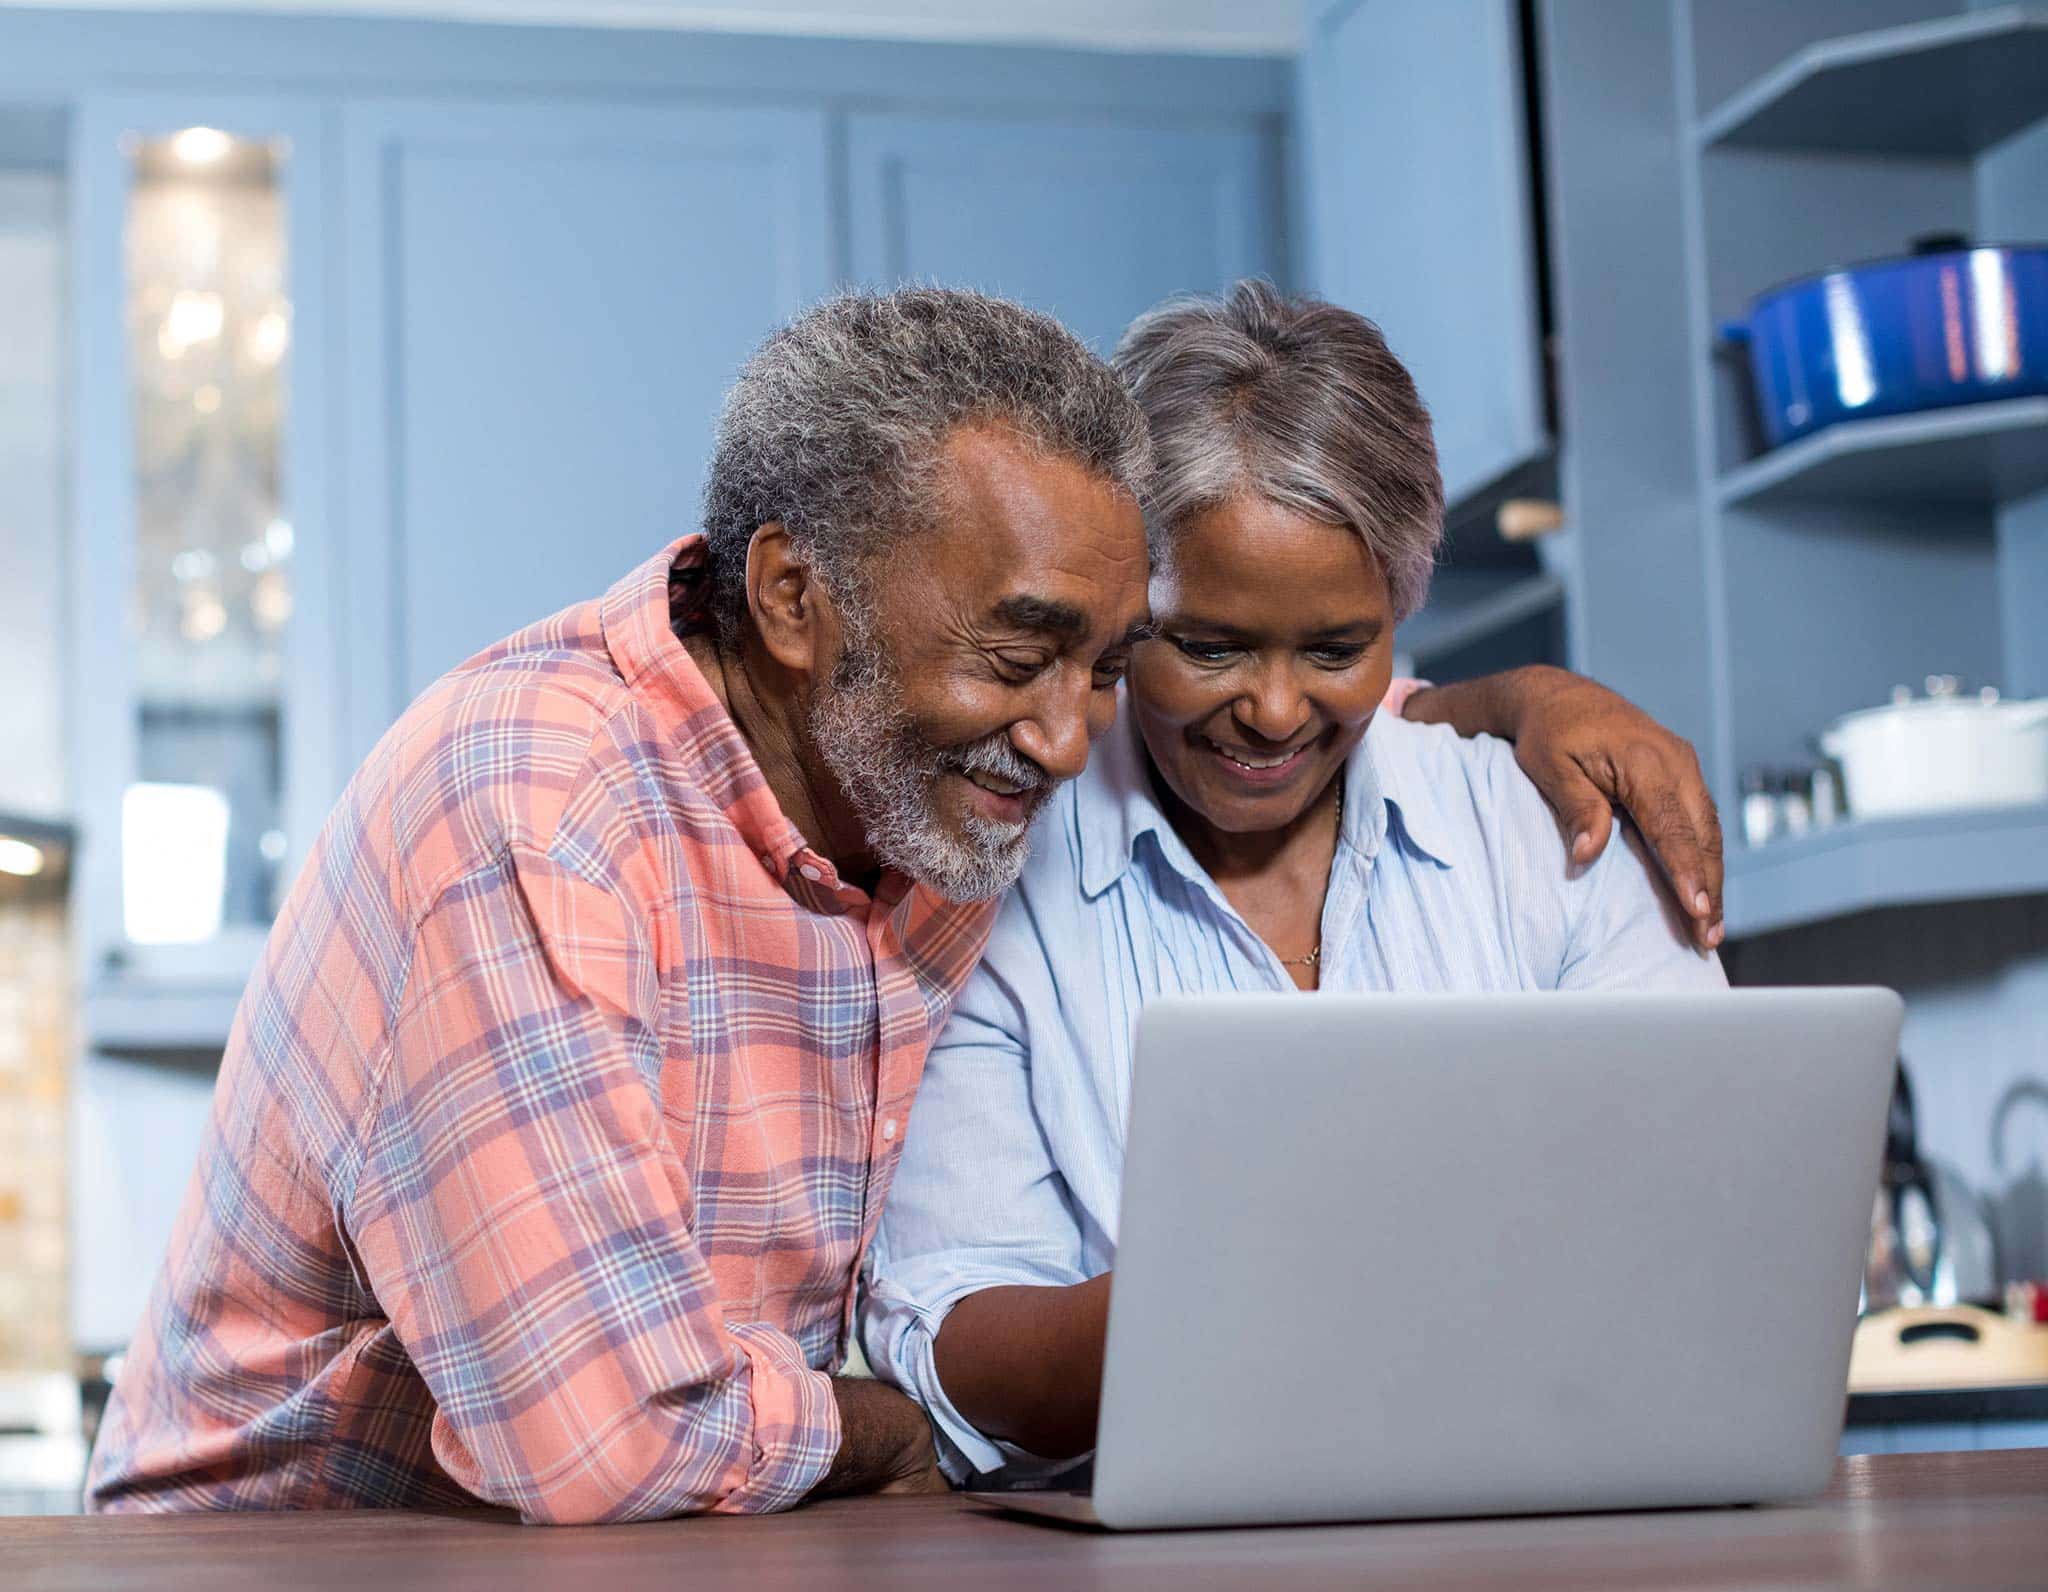 A senior couple sitting together at a counter looking at a laptop